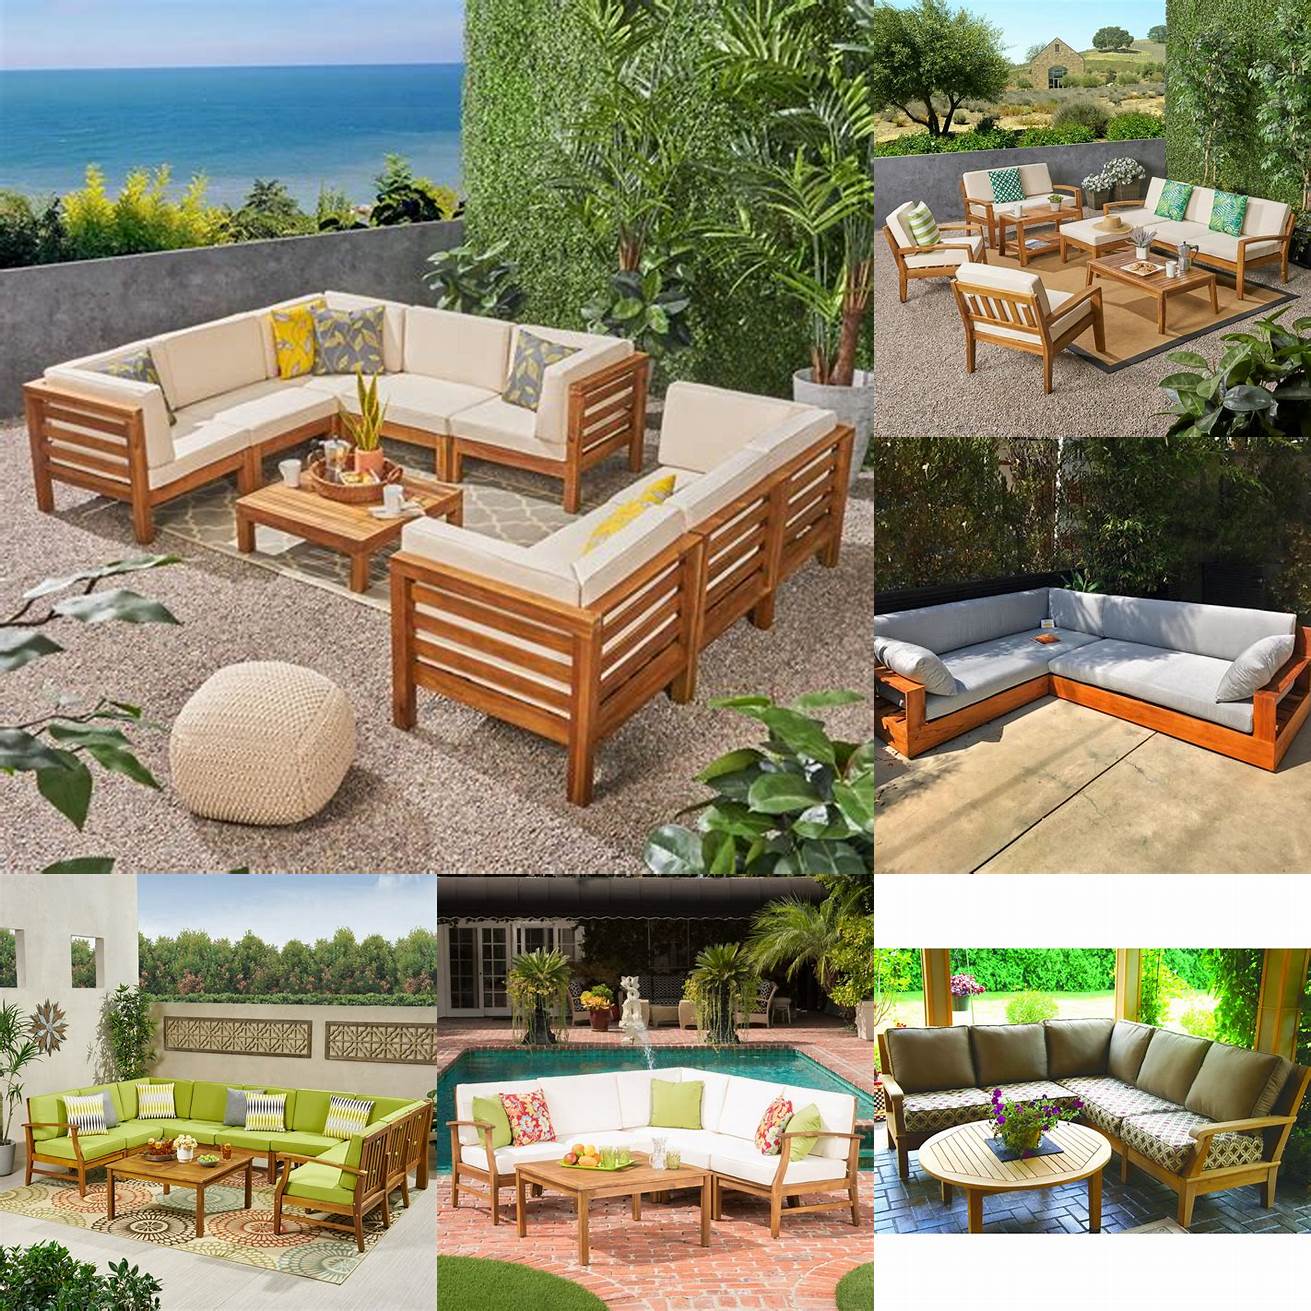 9 Teak outdoor furniture sectional deep cushions in a country home